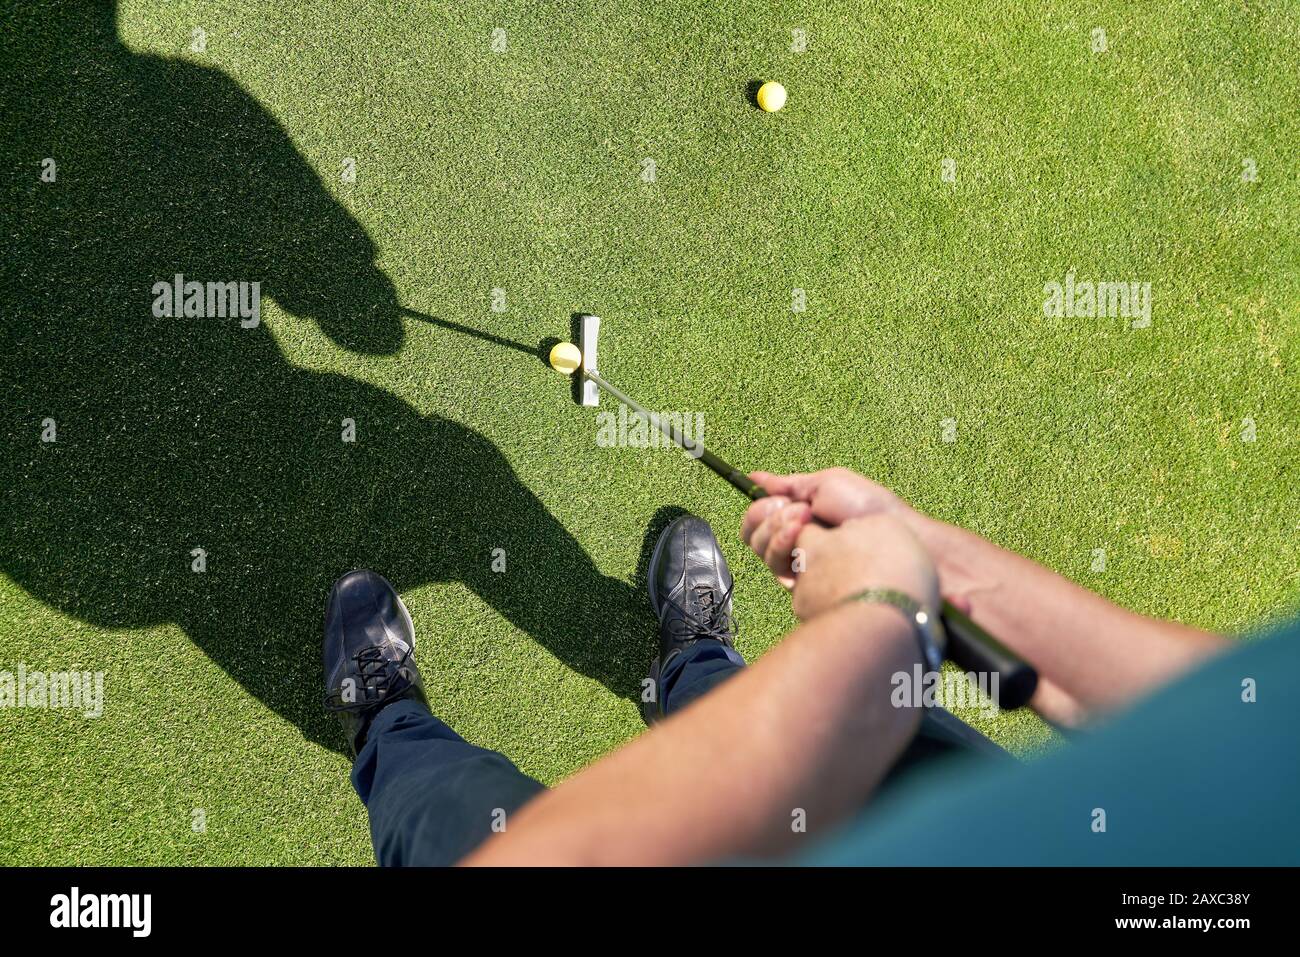 Point of view man putting golf ball on sunny greens Stock Photo